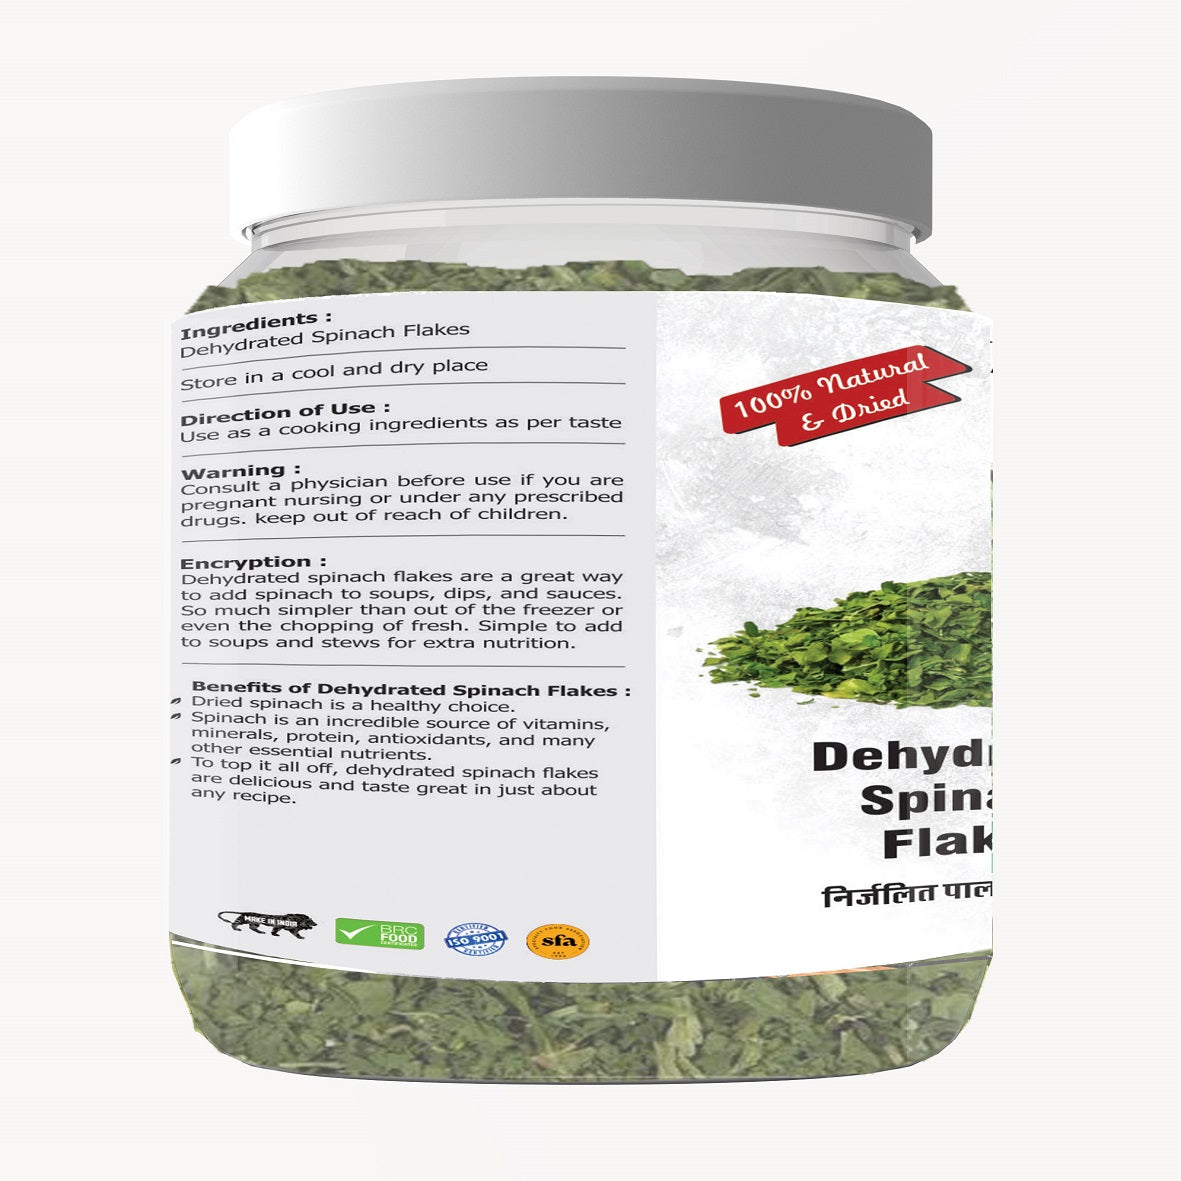 Dry Spinach Flakes Premium Quality 150 GM